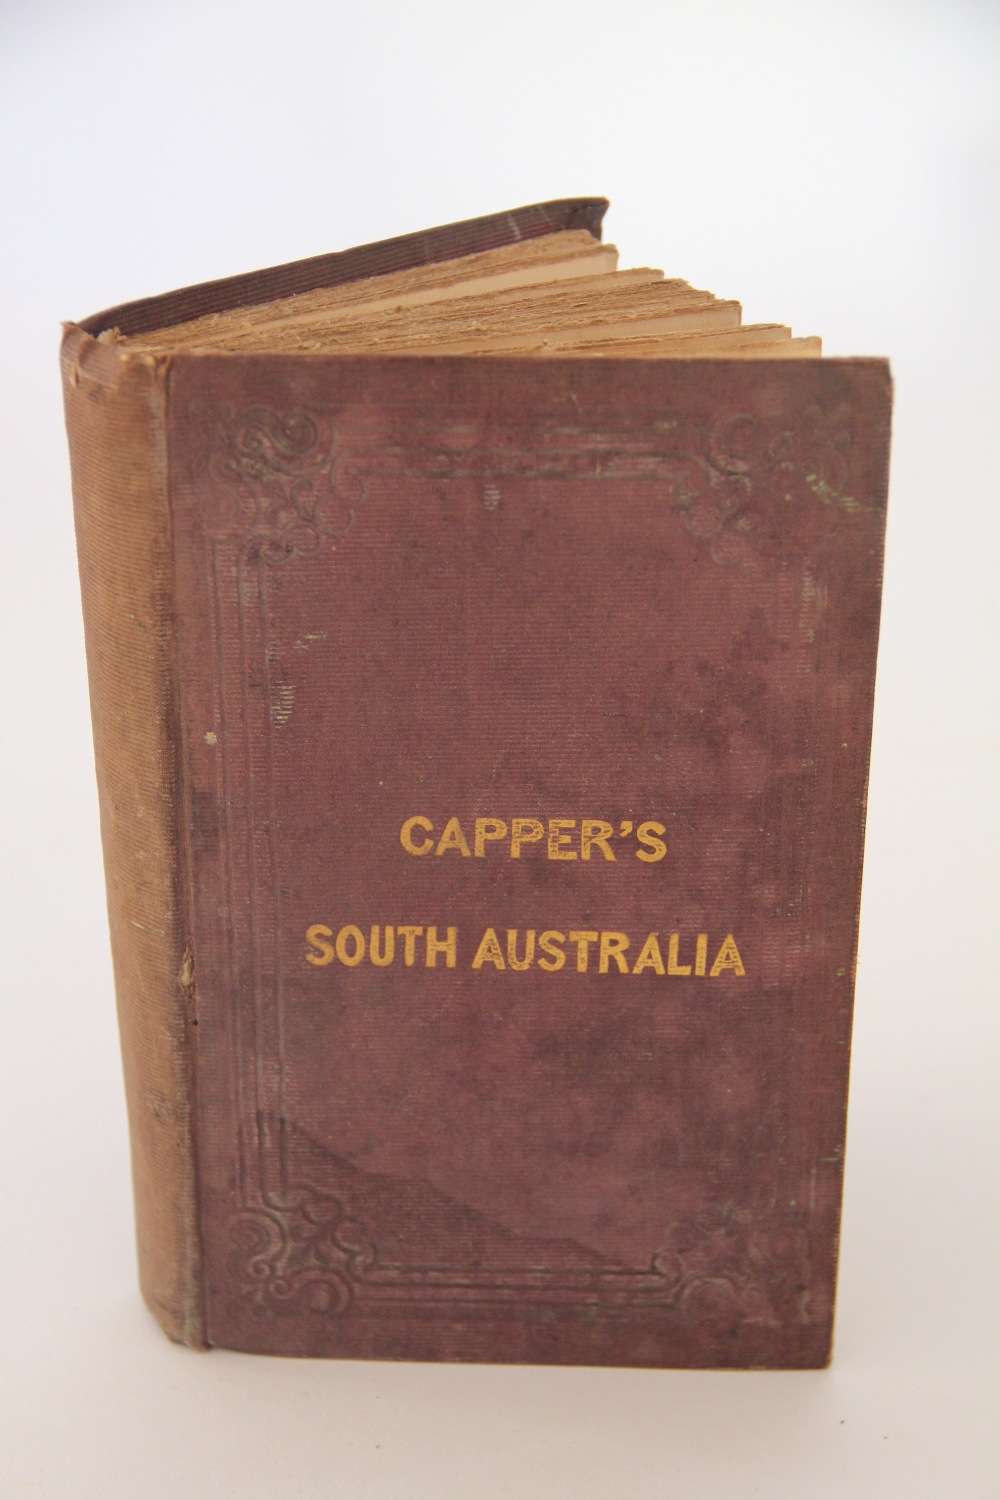 CAPPER (H), CAPPER'S SOUTH AUSTRALIA, CONTAINING A HISTORY OF THE RISE,